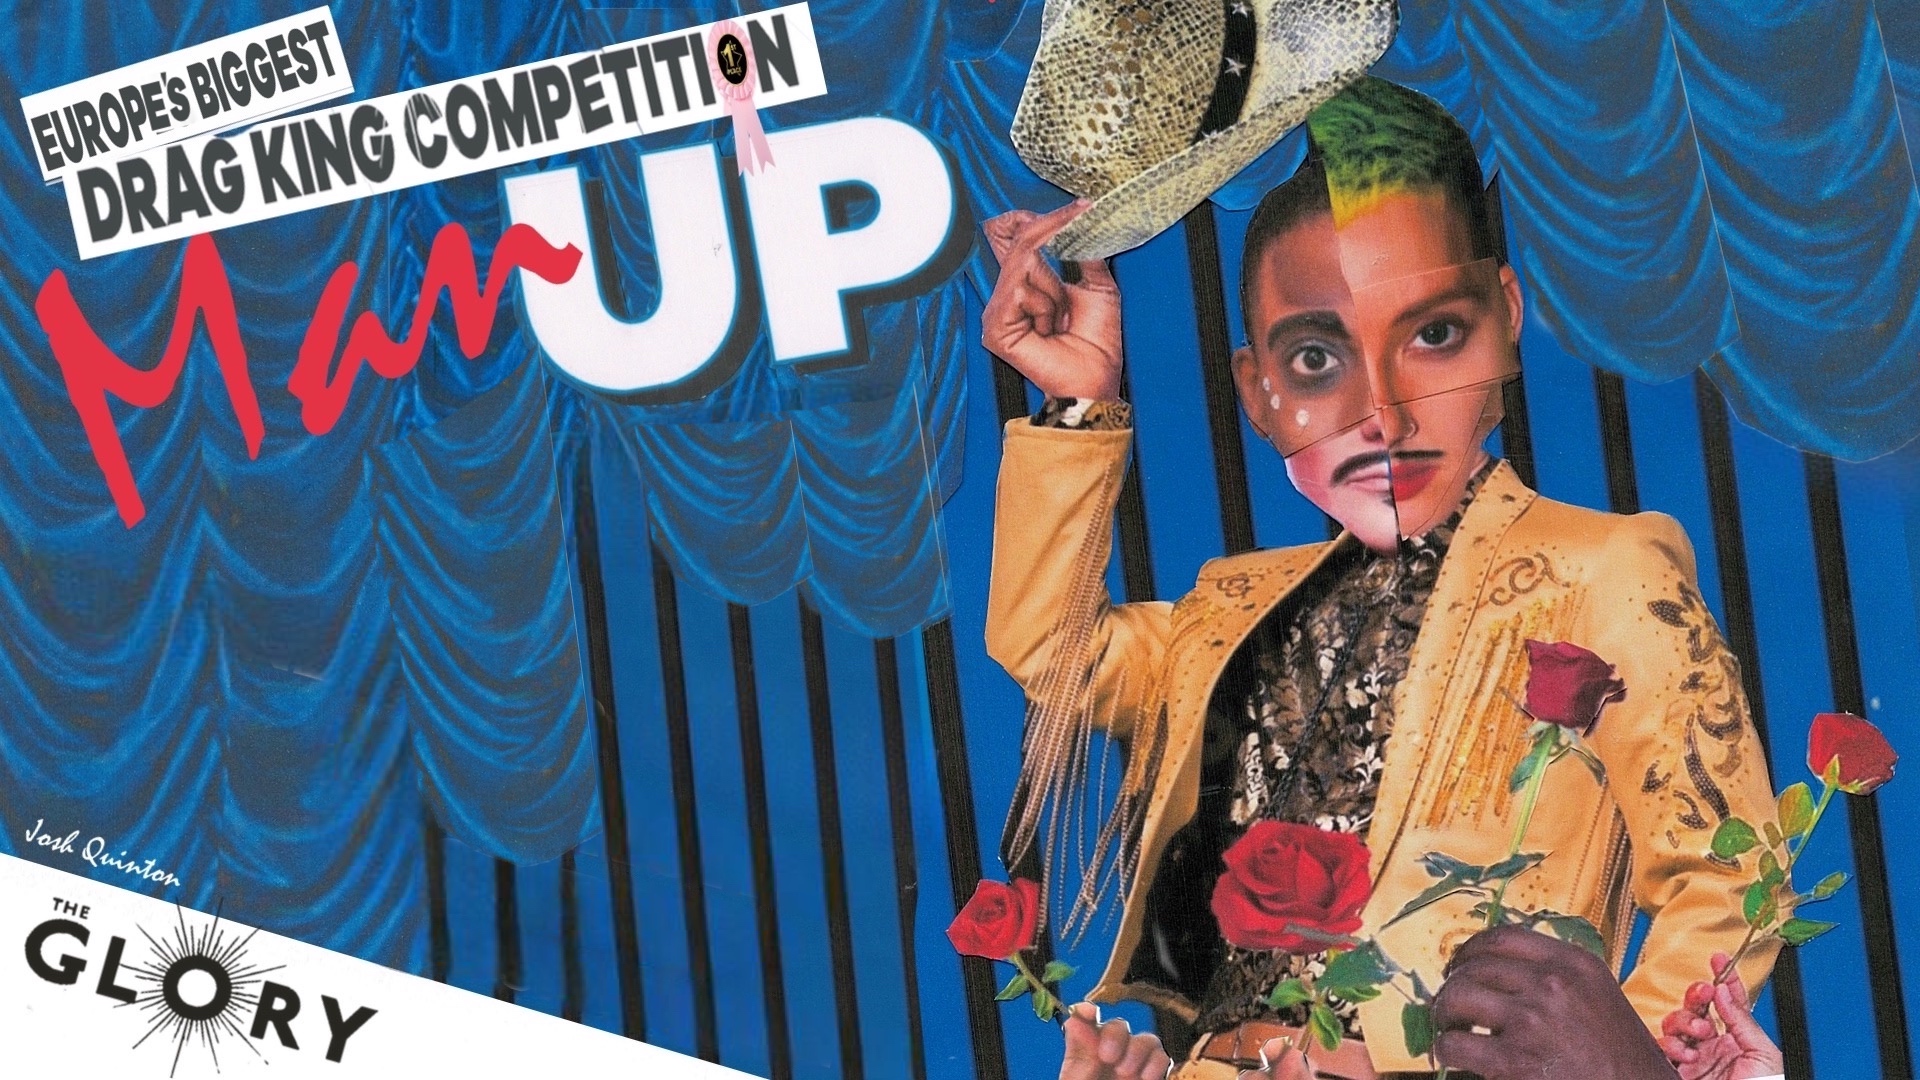 Man Up! Drag King Competition – HEAT 8